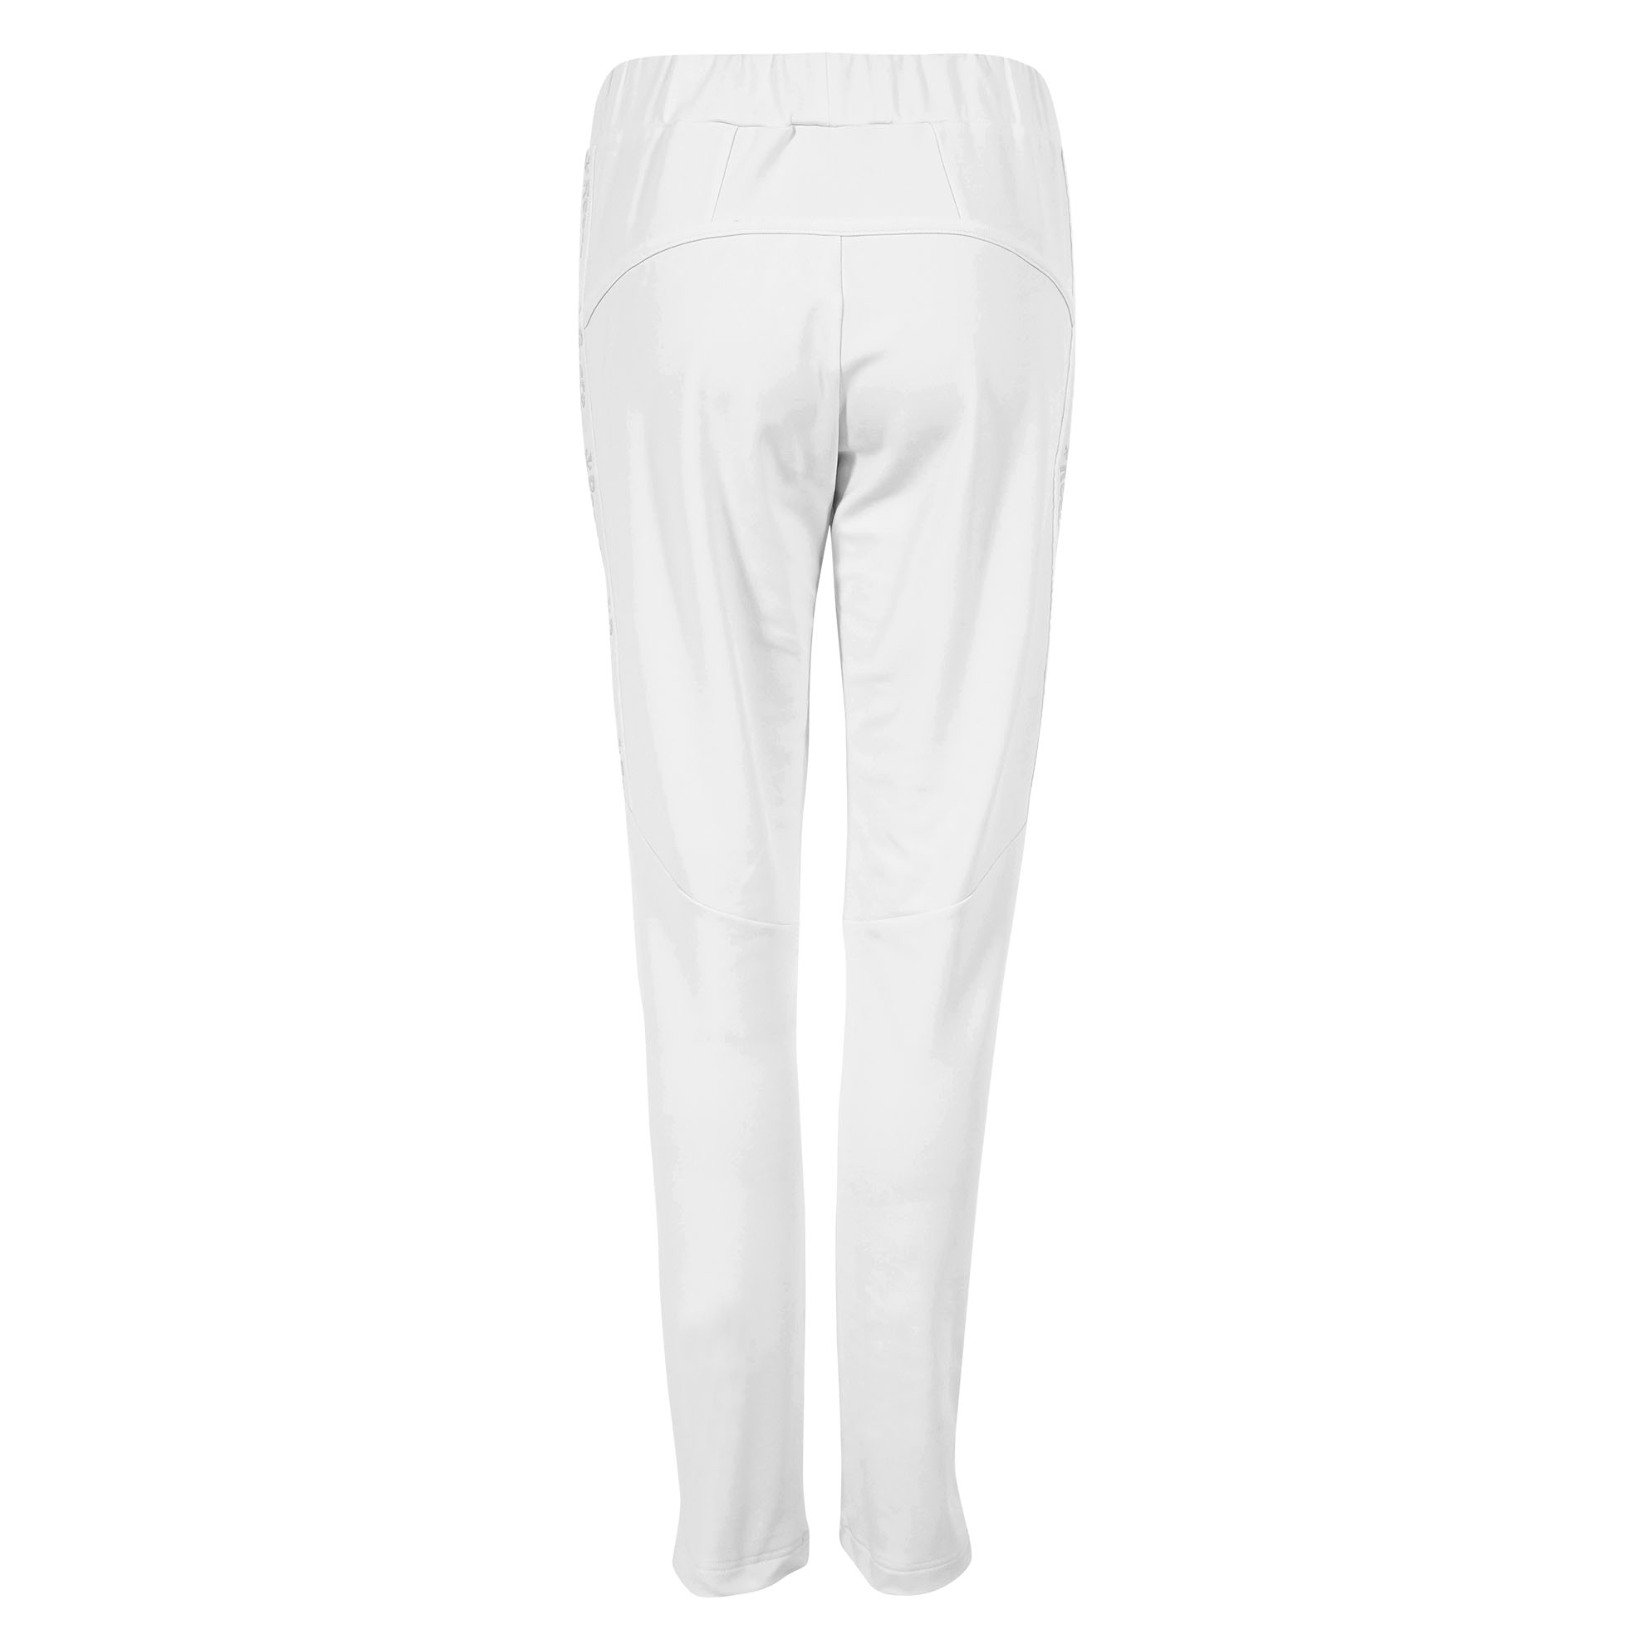 Reece Womens Cleve Stretched Fit Pants (W)